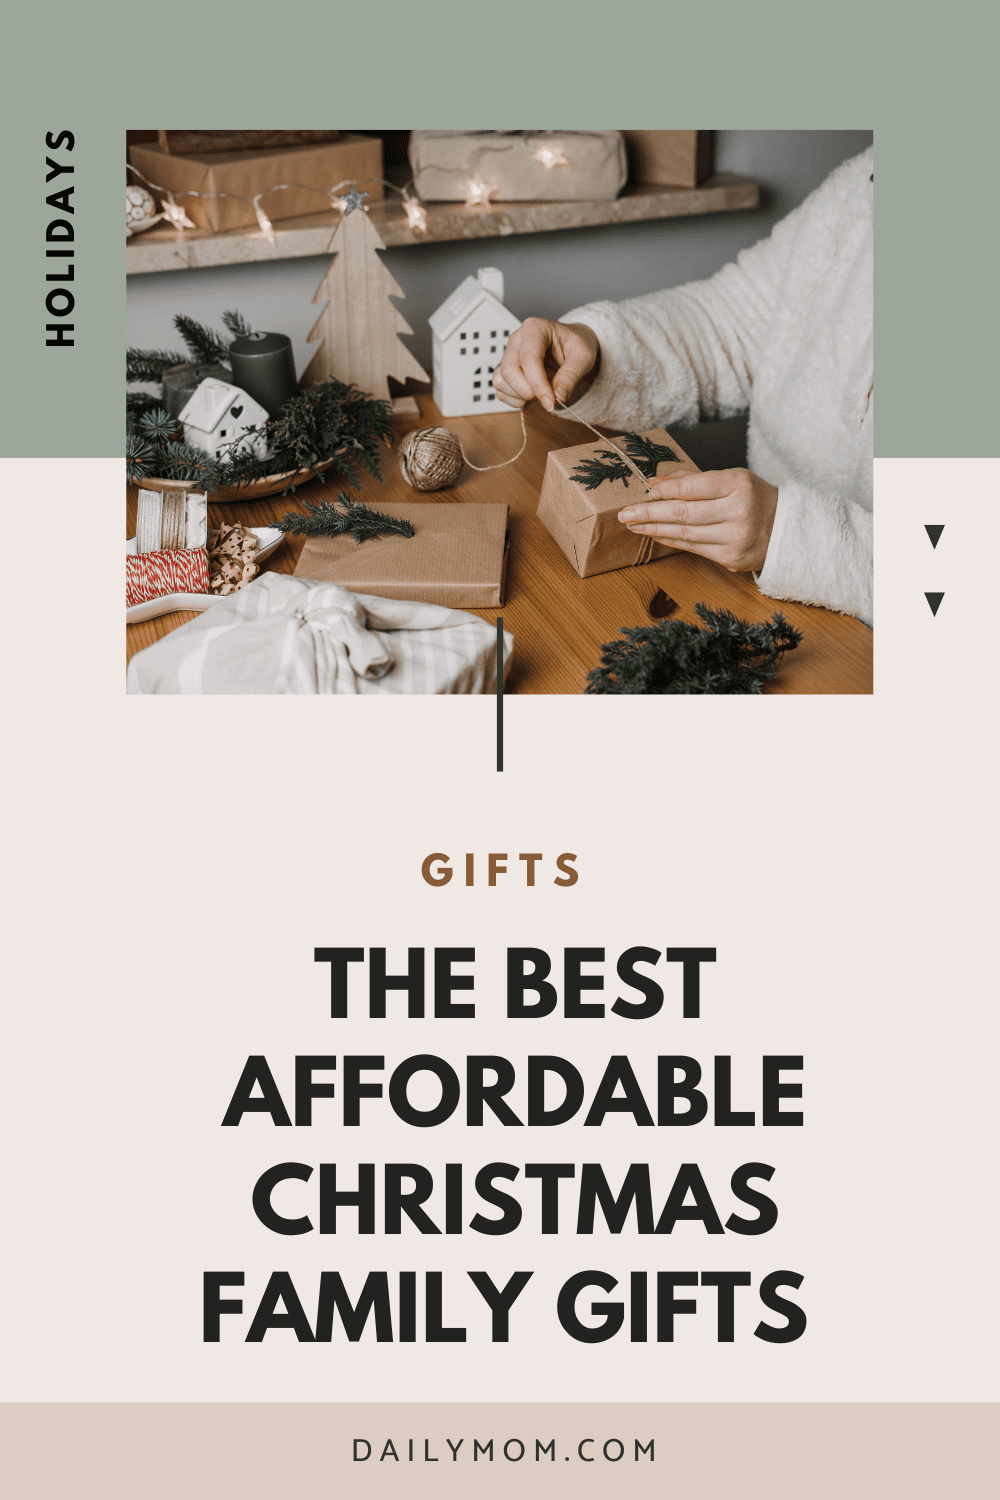 Best PRESCHOOL Gifts - Holiday Gift Guide #11 